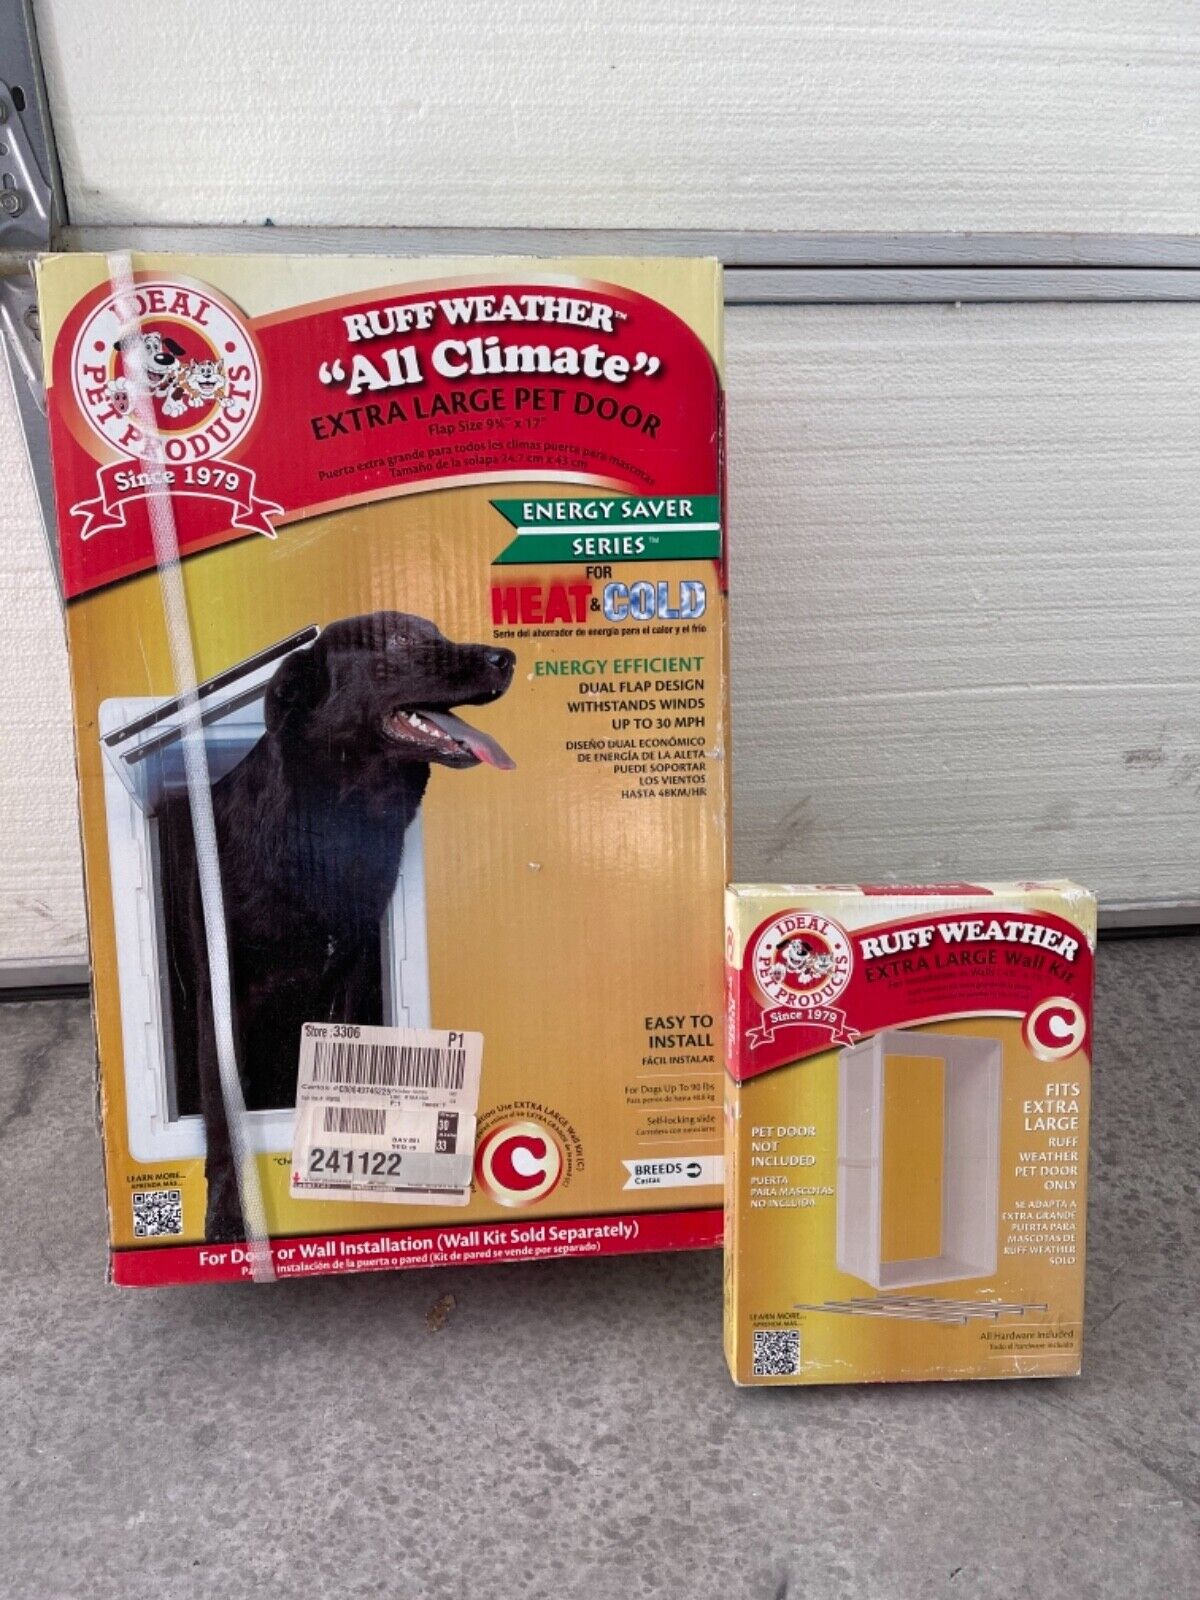 Ideal Products Extra Large Pet Door